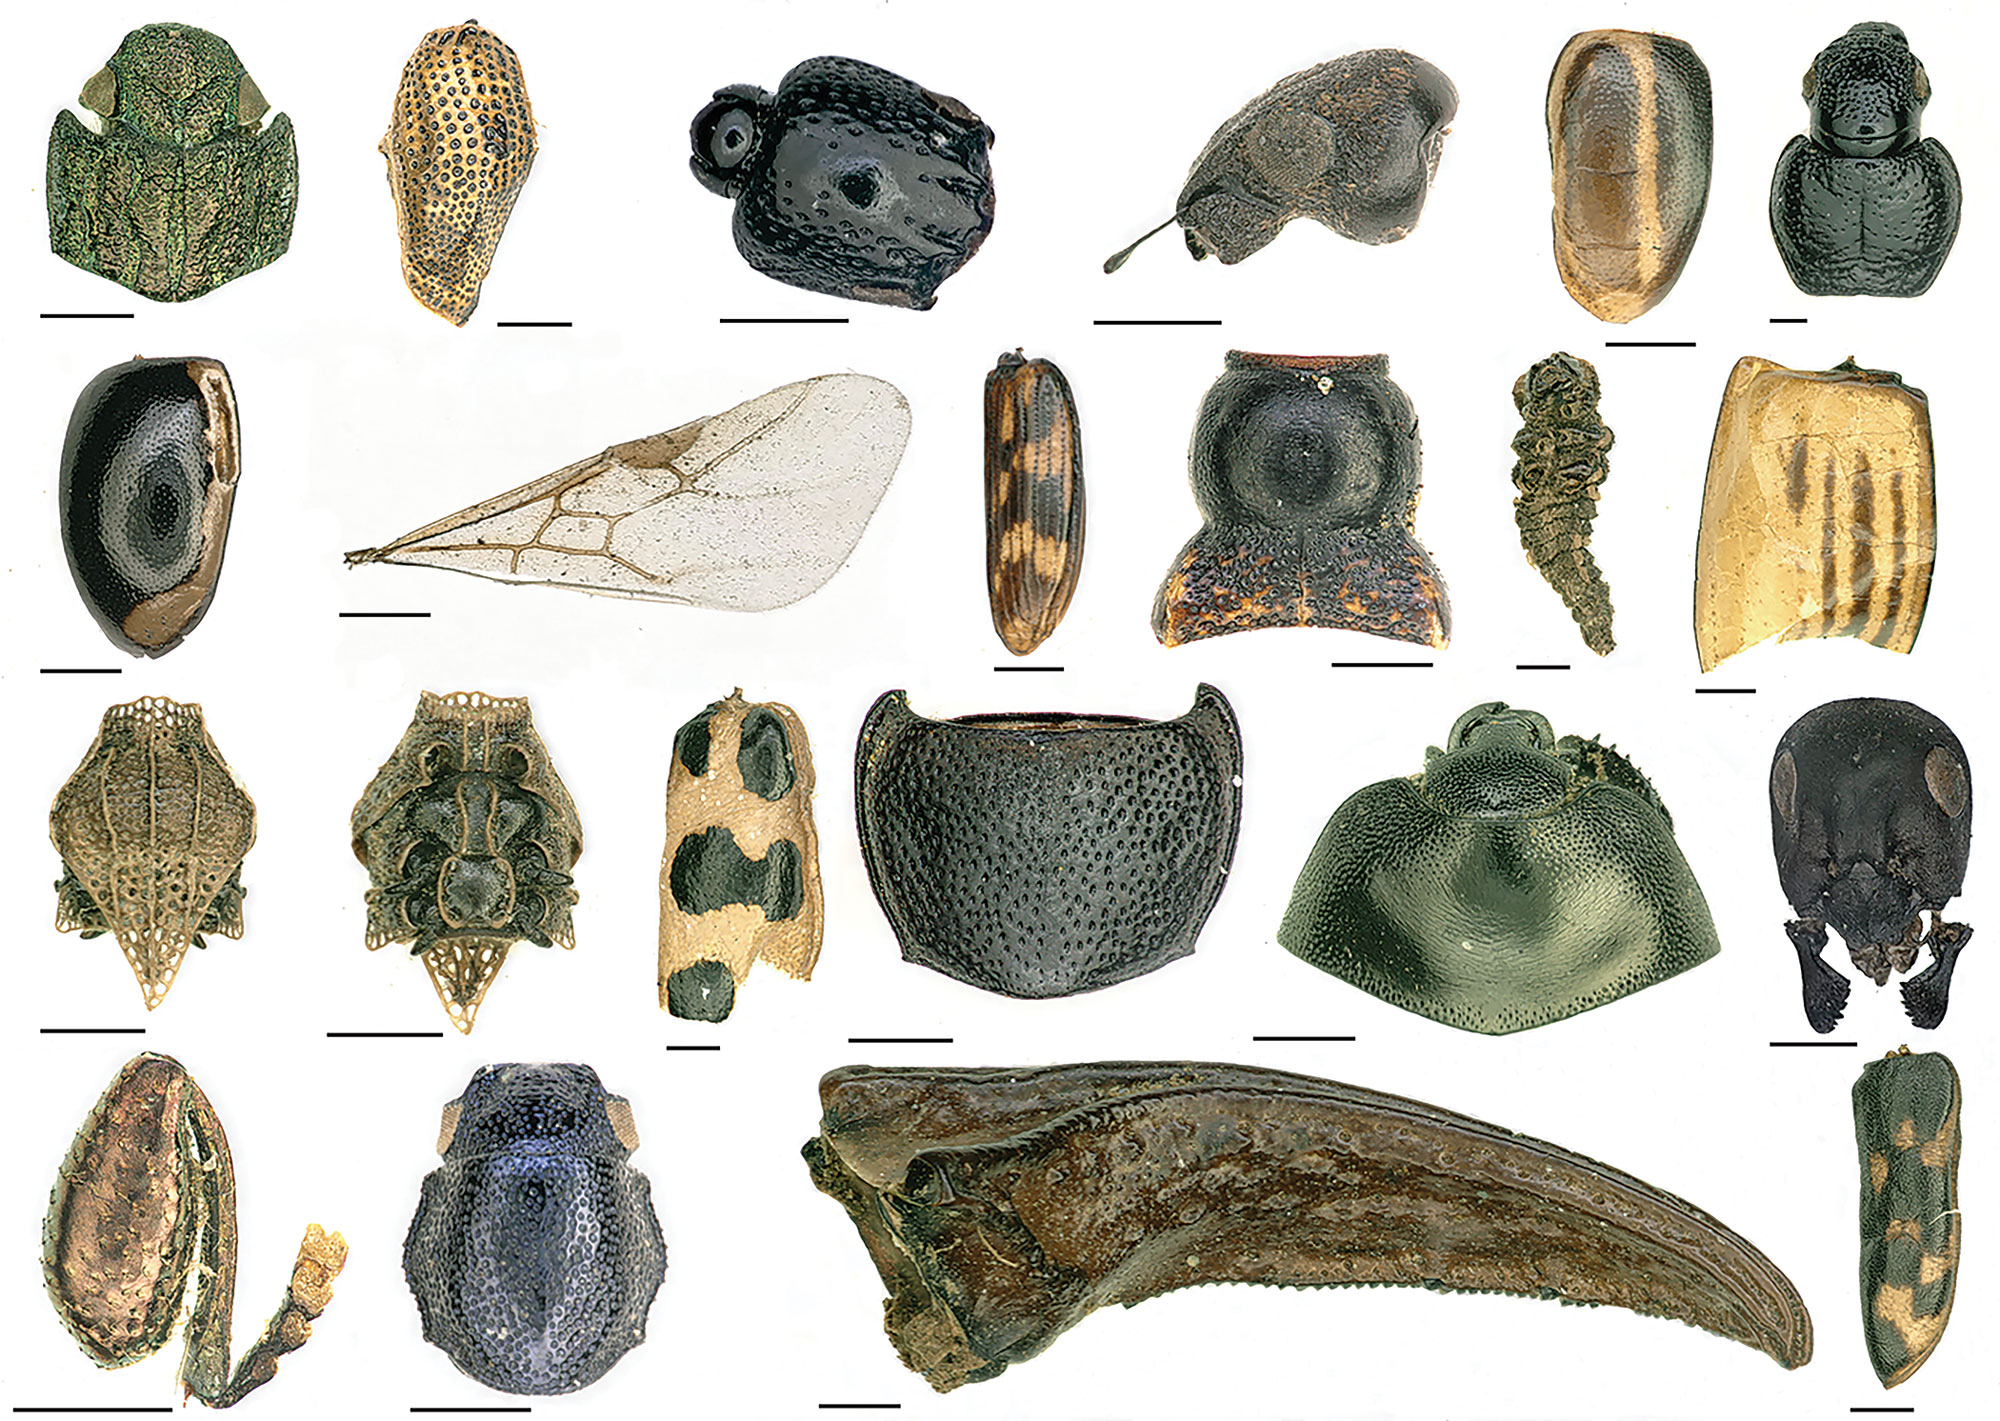 A composite of insect fossils